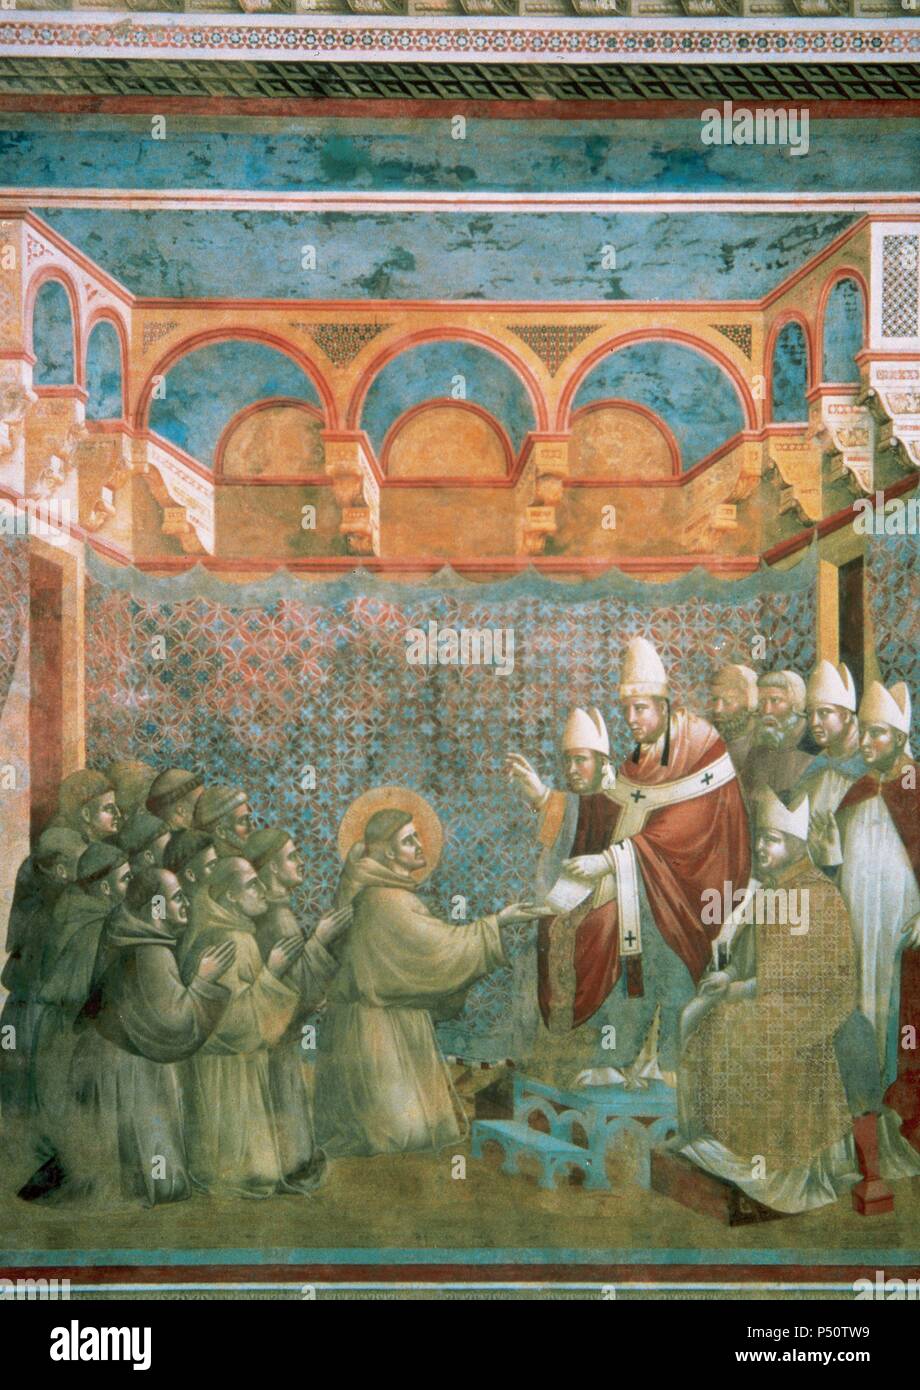 Gothic Art. Italy. Giotto di Bondone (1266/7-1337). Italian painter and architect. Pope Innocent III approving the monastic rule of St. Francis of Assisi (1296). Fresco of the Upper Church of St. Francis. Assisi. Italy. Stock Photo